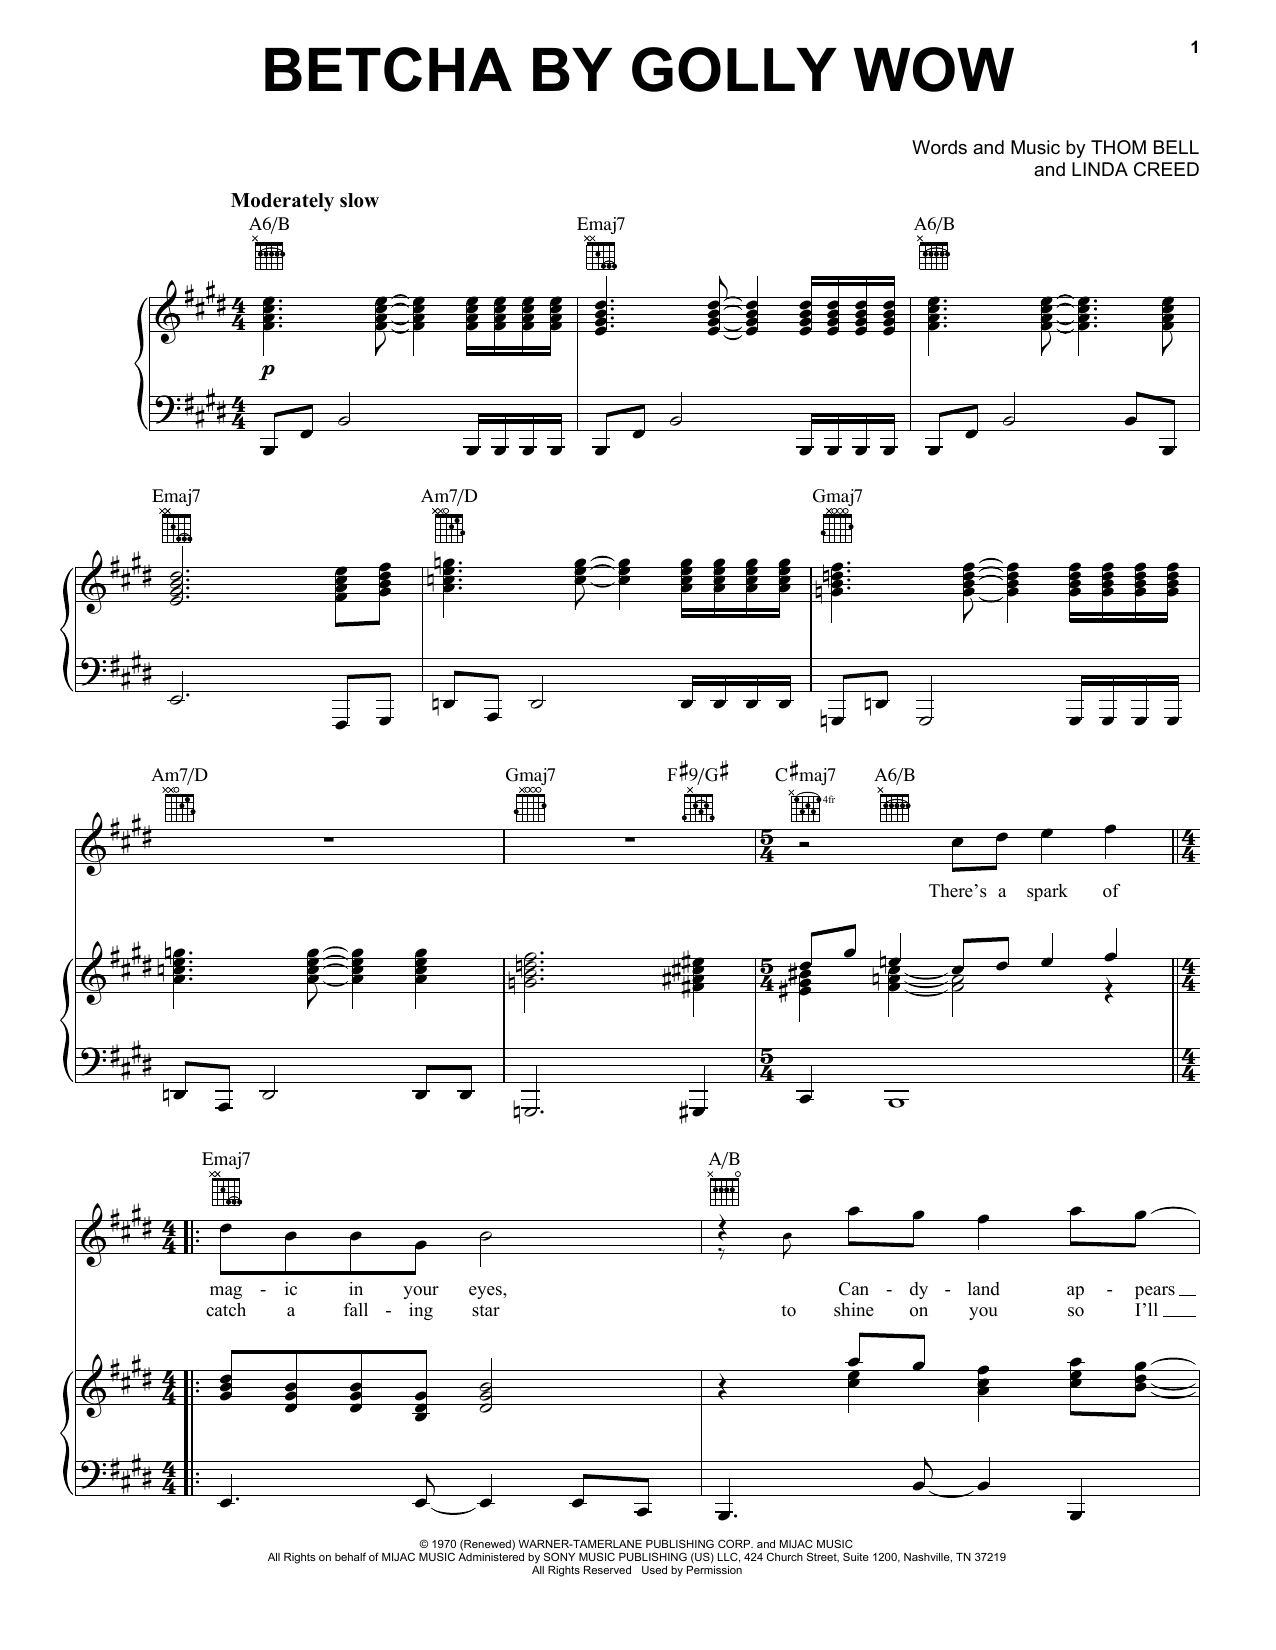 Download The Stylistics Betcha By Golly Wow Sheet Music